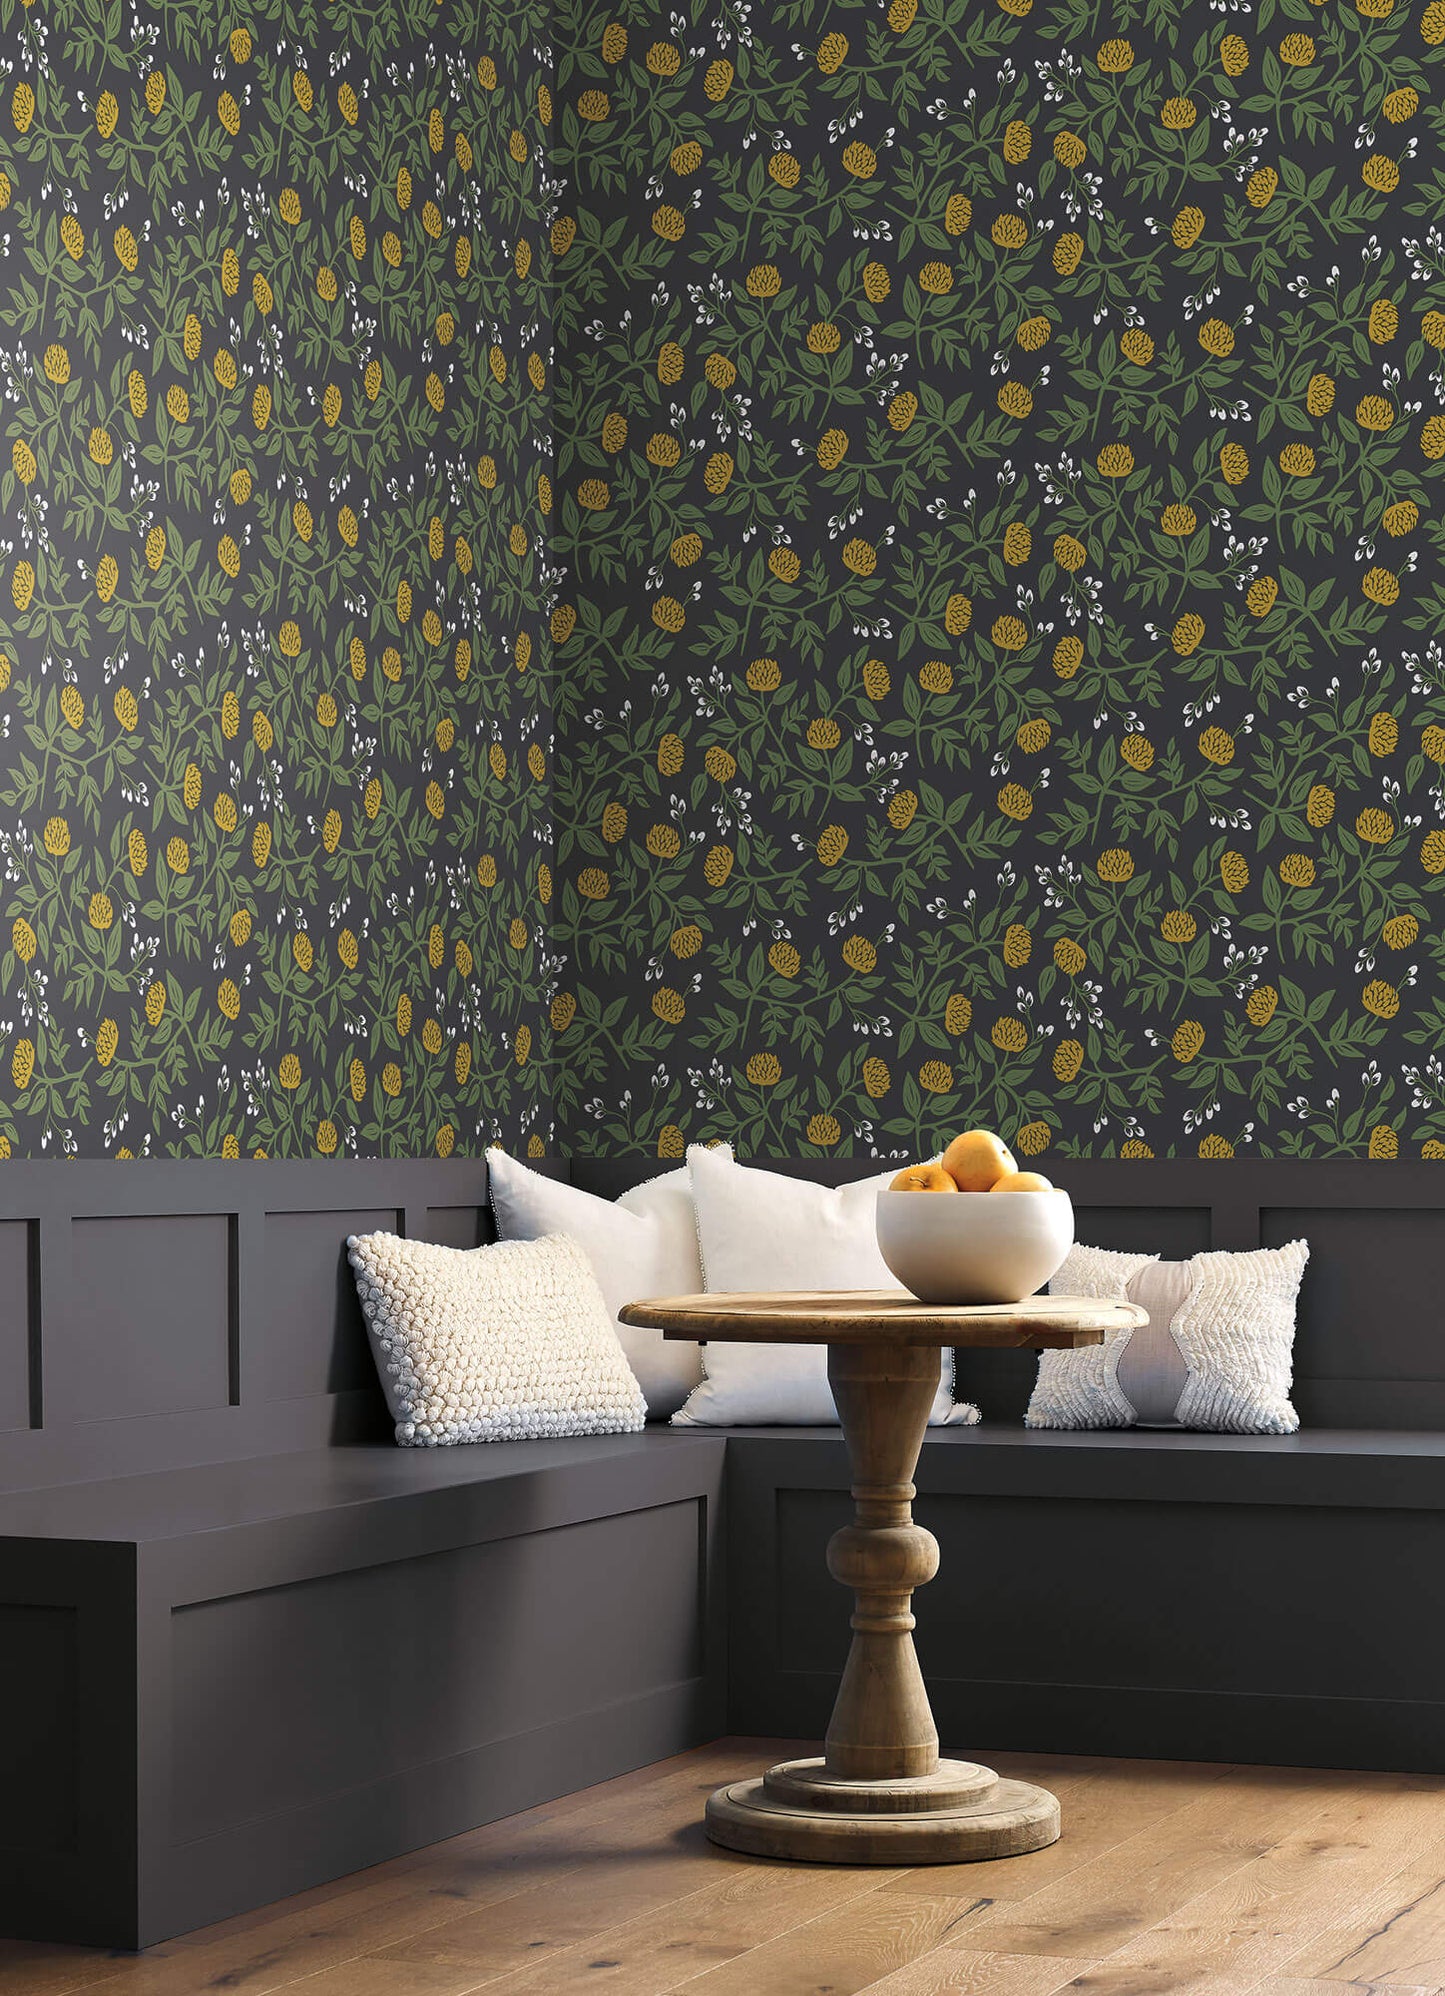 Rifle Paper Co. Peonies Wallpaper - Black & Gold